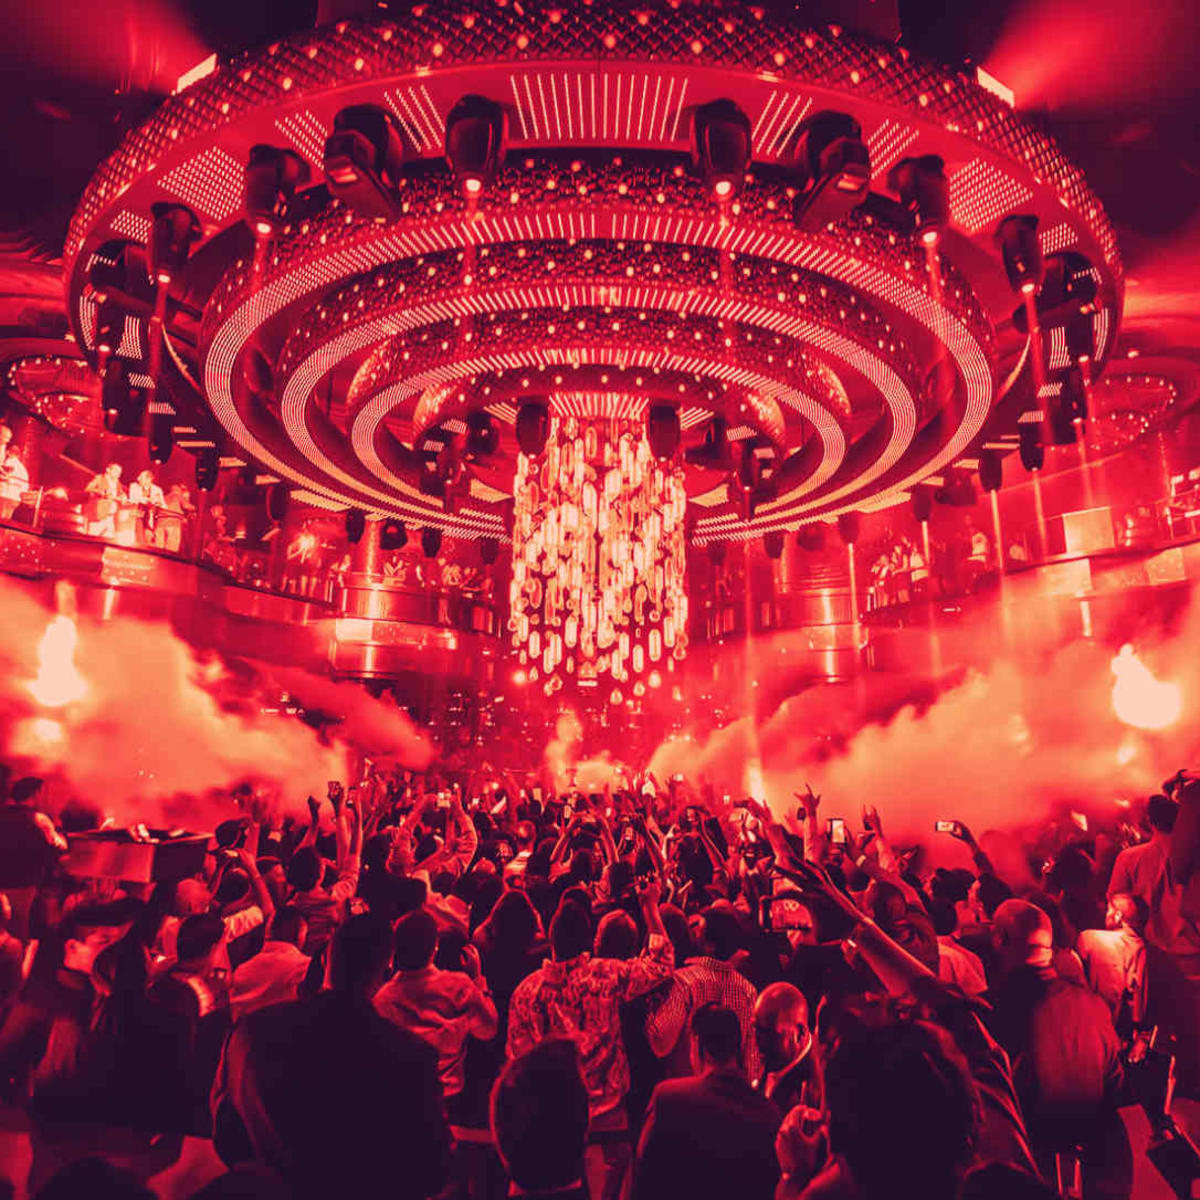 Omnia and Hakkasan Nightclubs Expand Operations to Reintroduce Weekly  Industry Night  - The Latest Electronic Dance Music News, Reviews  & Artists